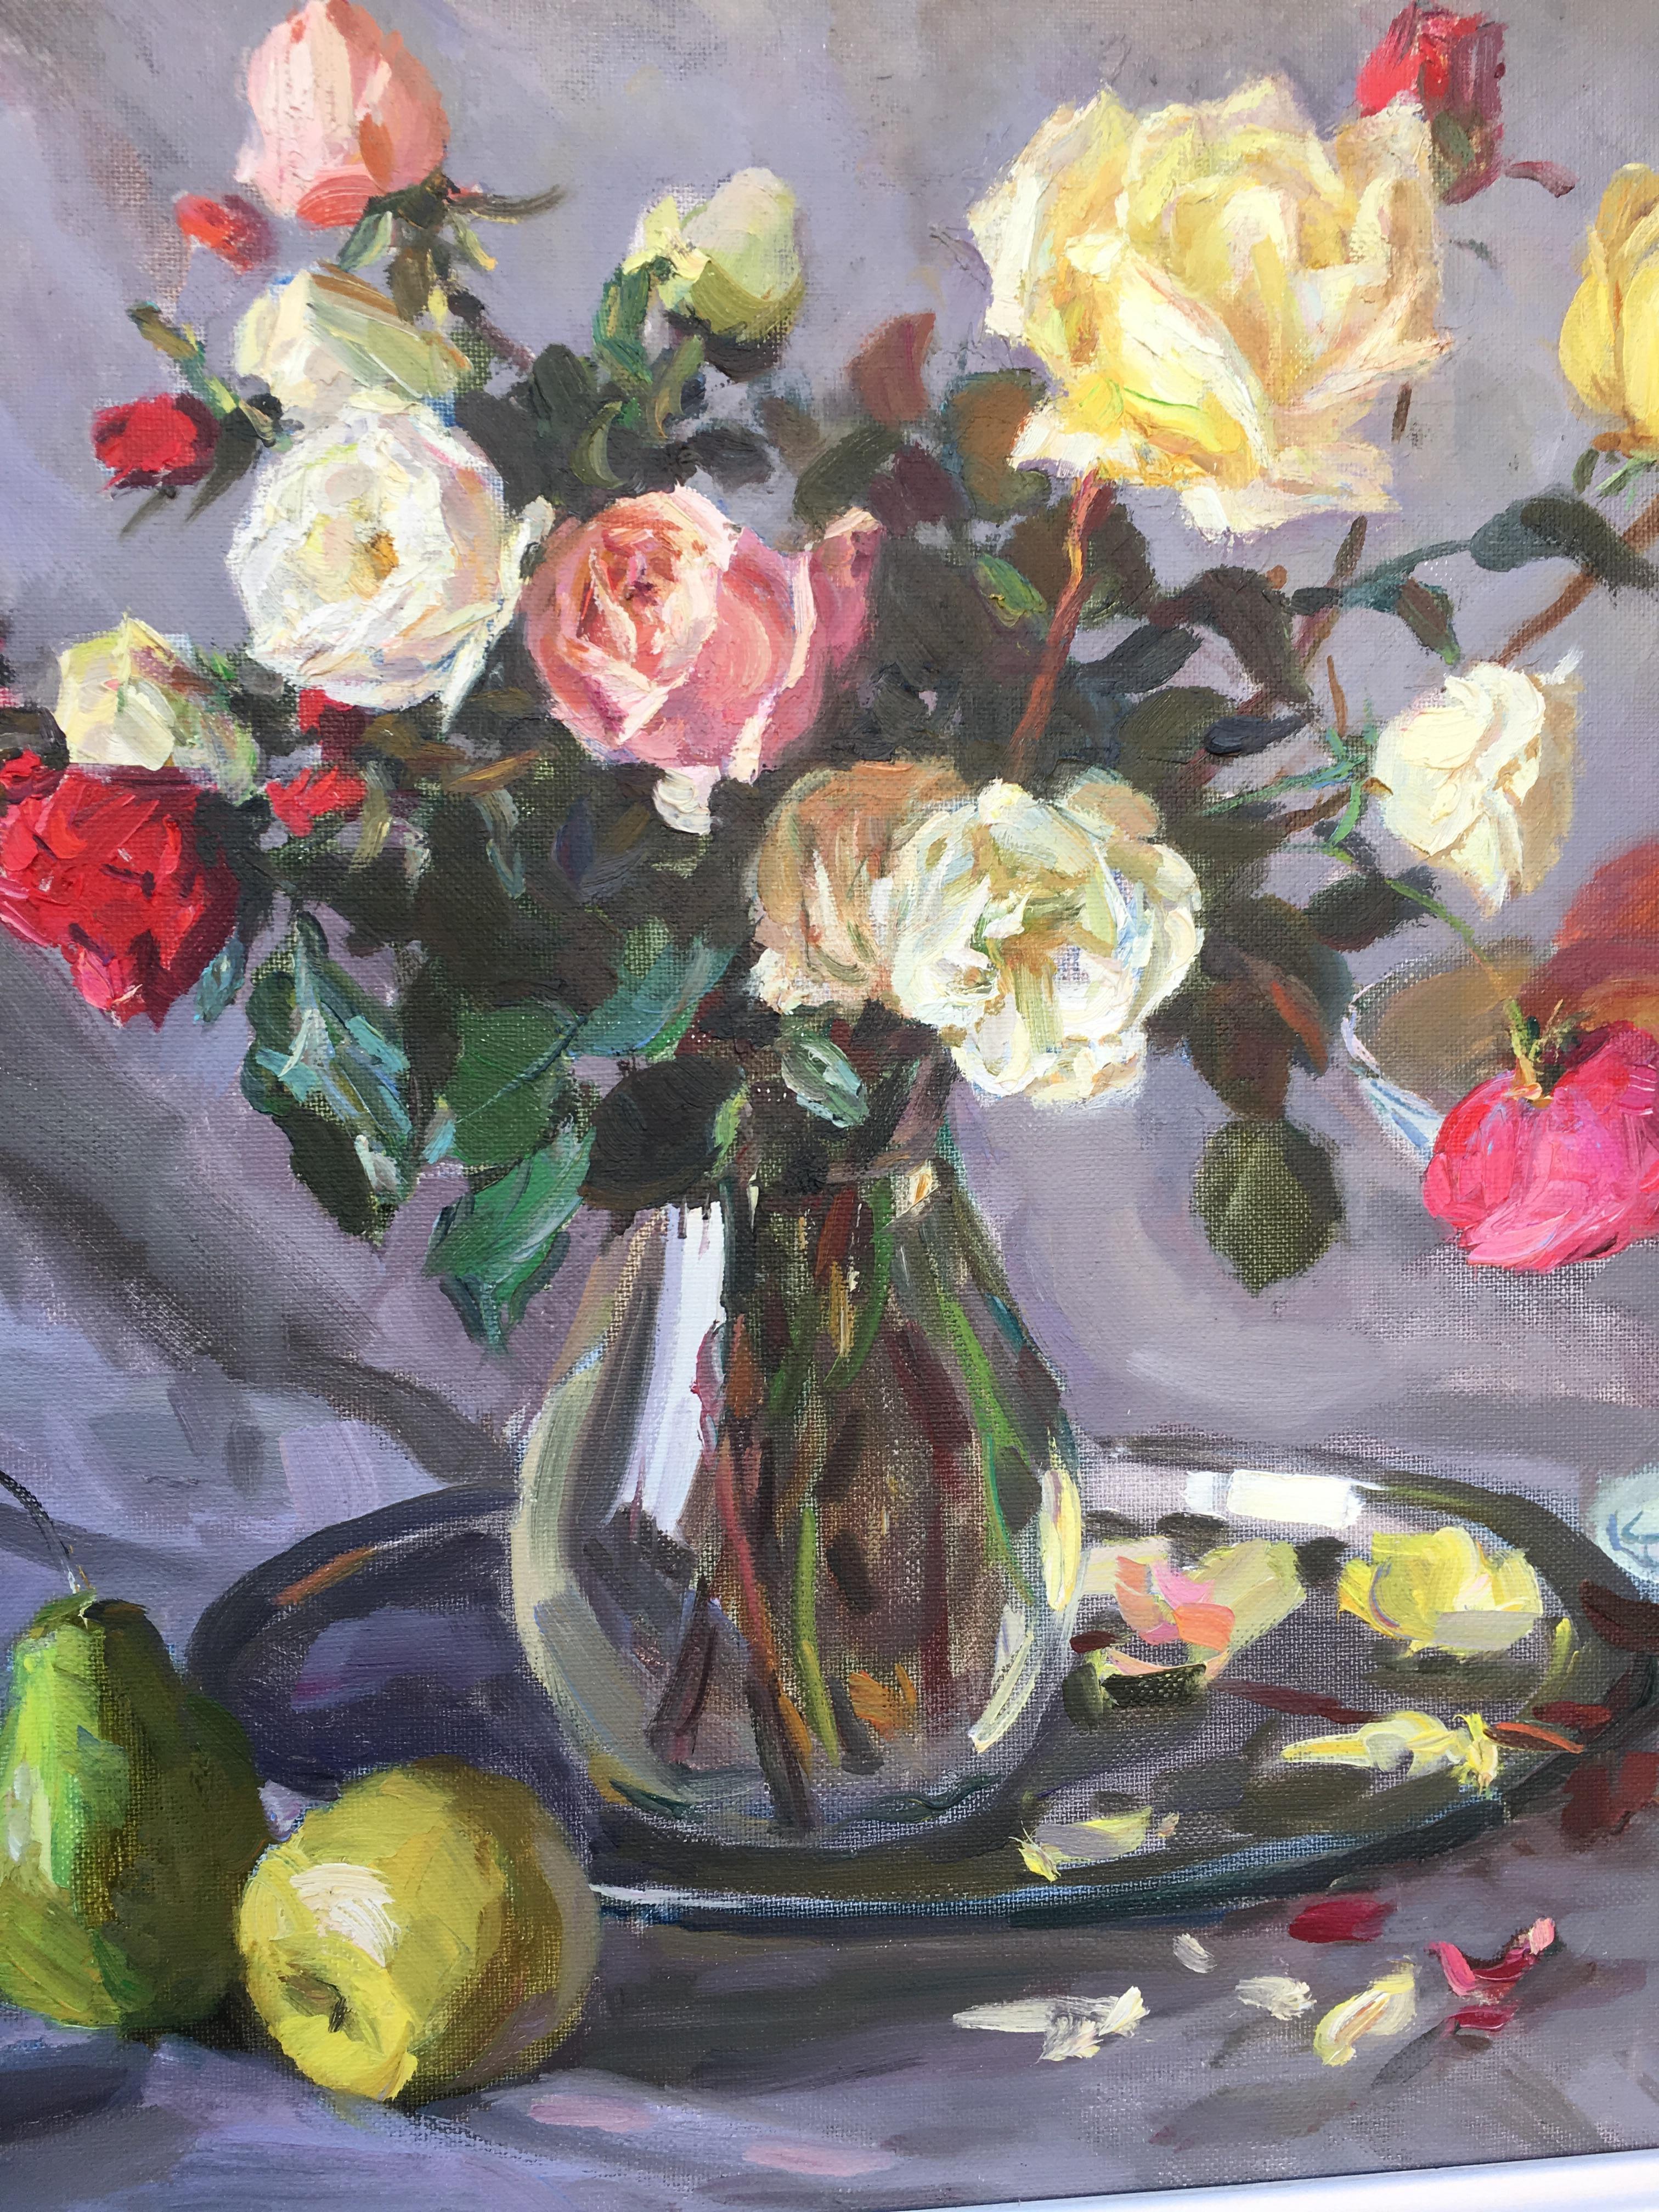 Roses and fruits, Marchenko oil on canvas post-impressionist still-life - Painting by Sergey Marchenko